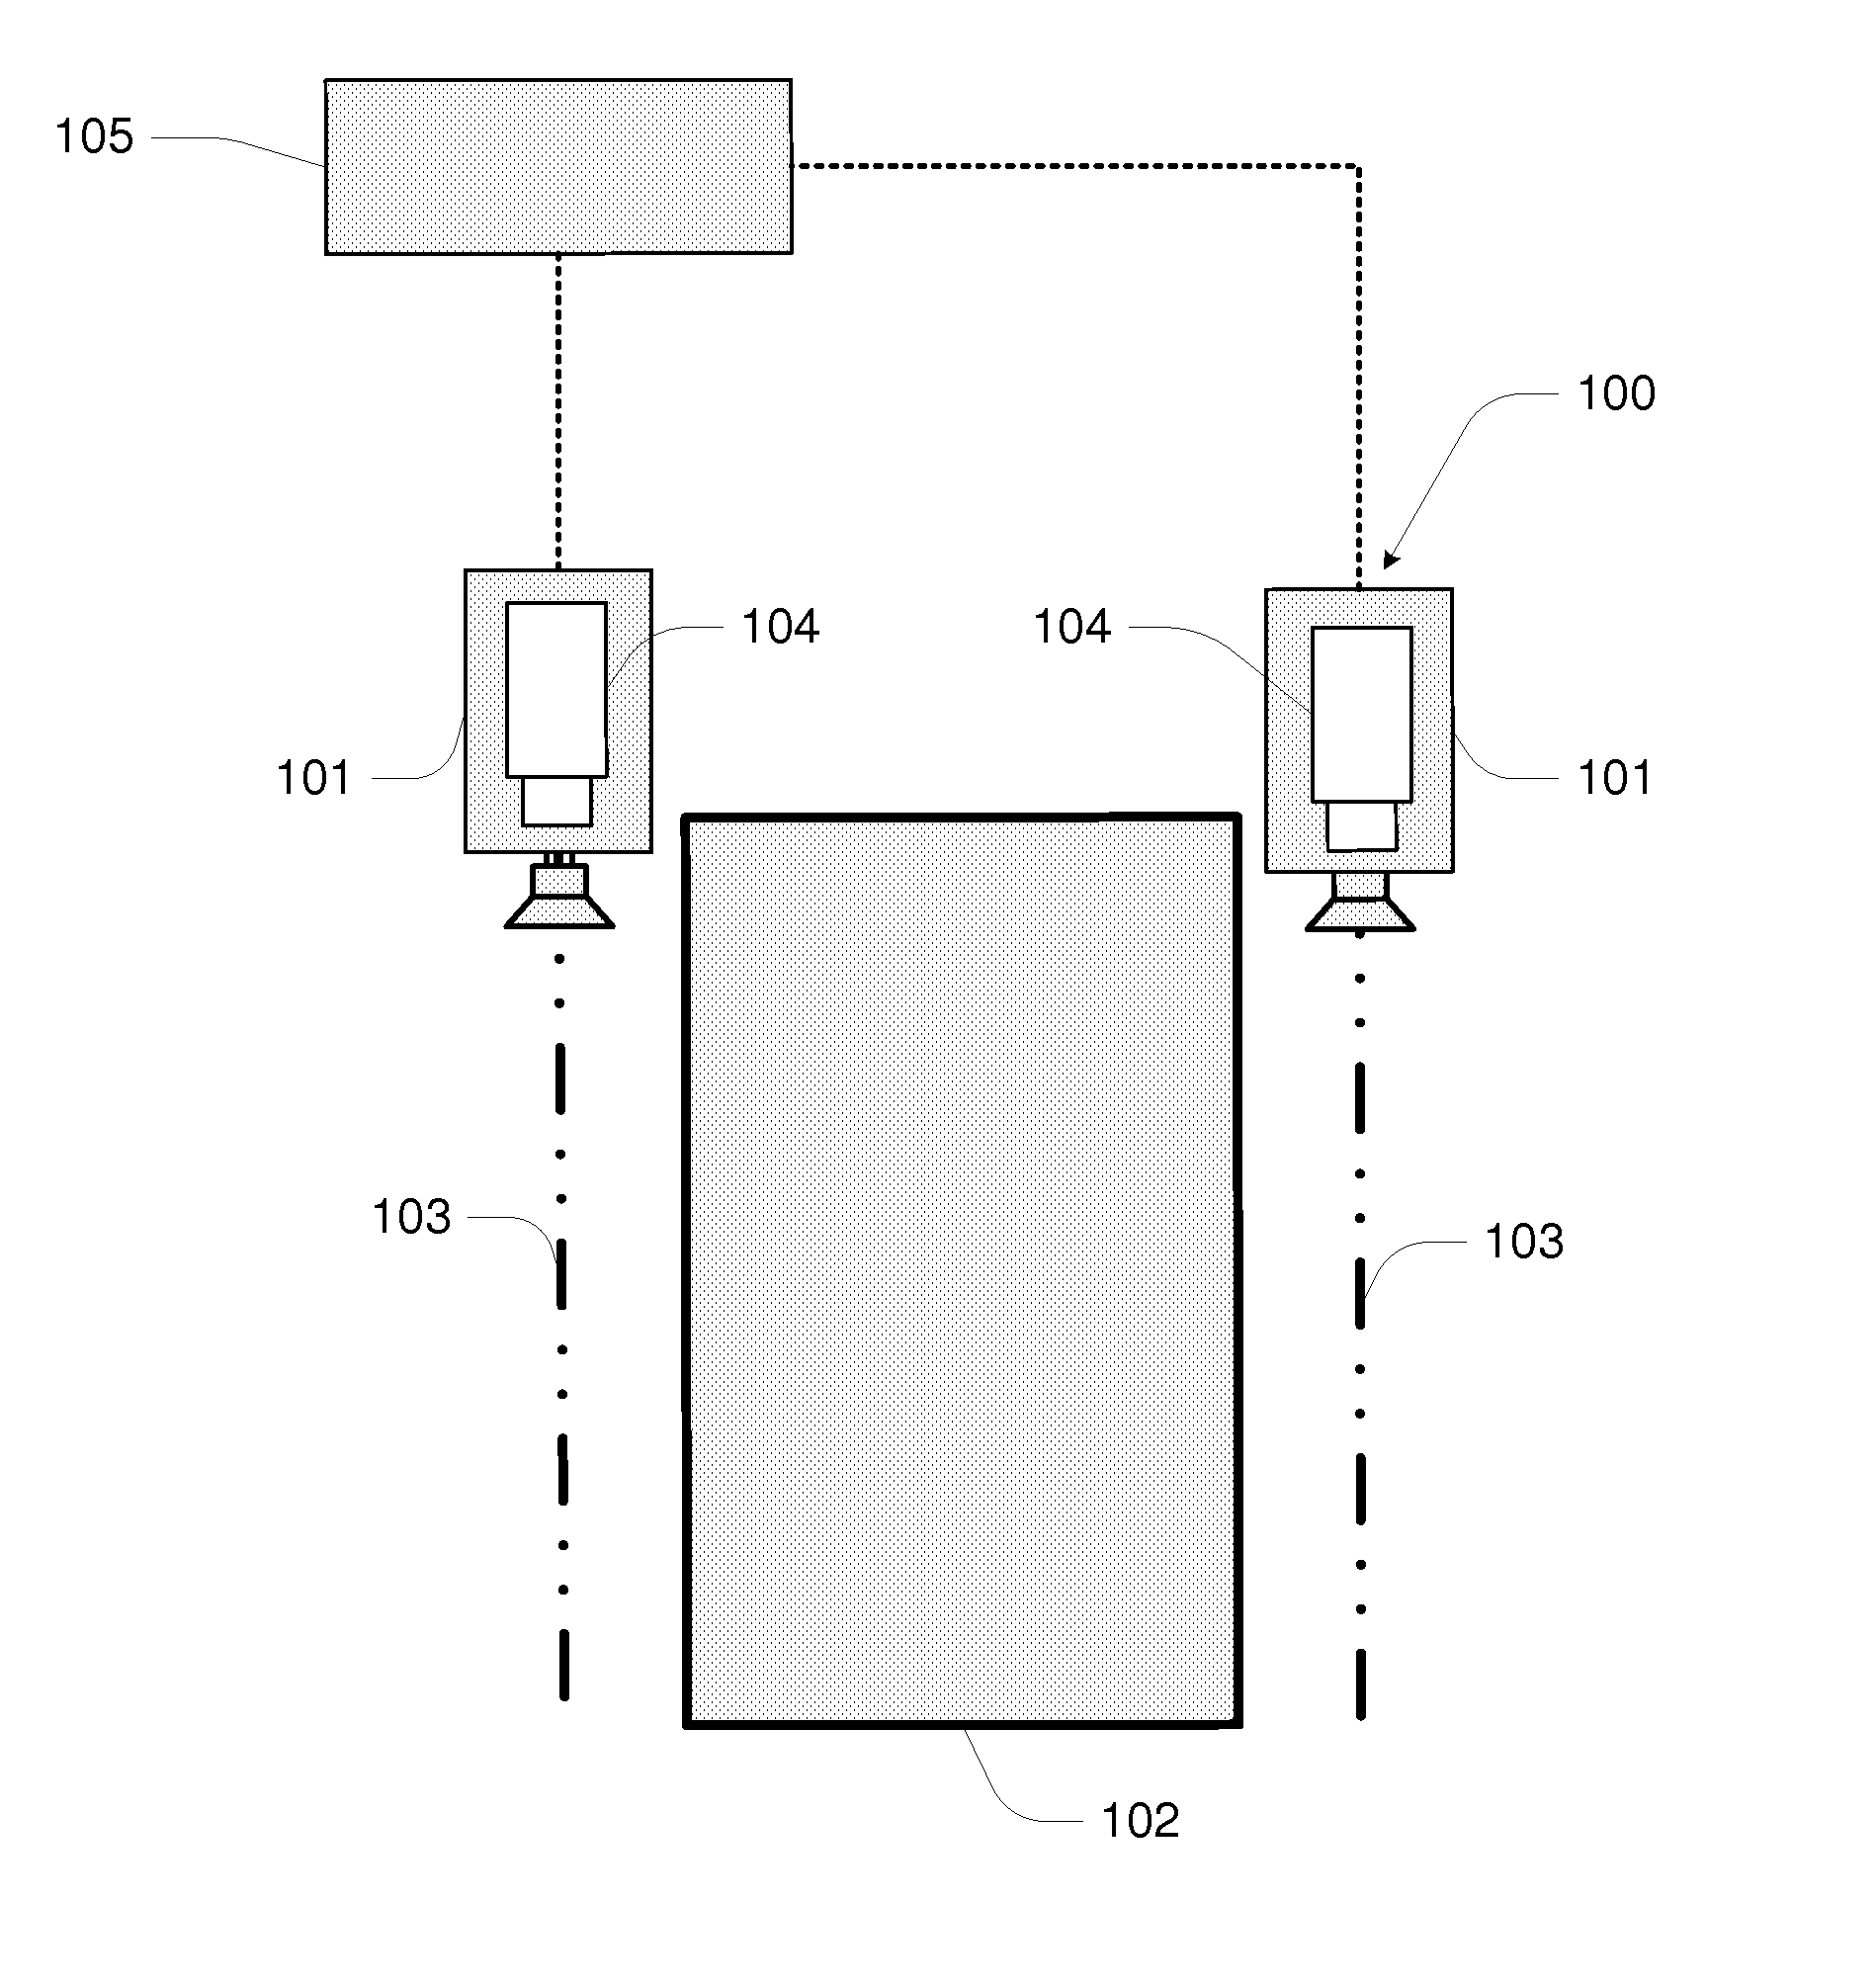 Patient monitoring system with image capture functionality